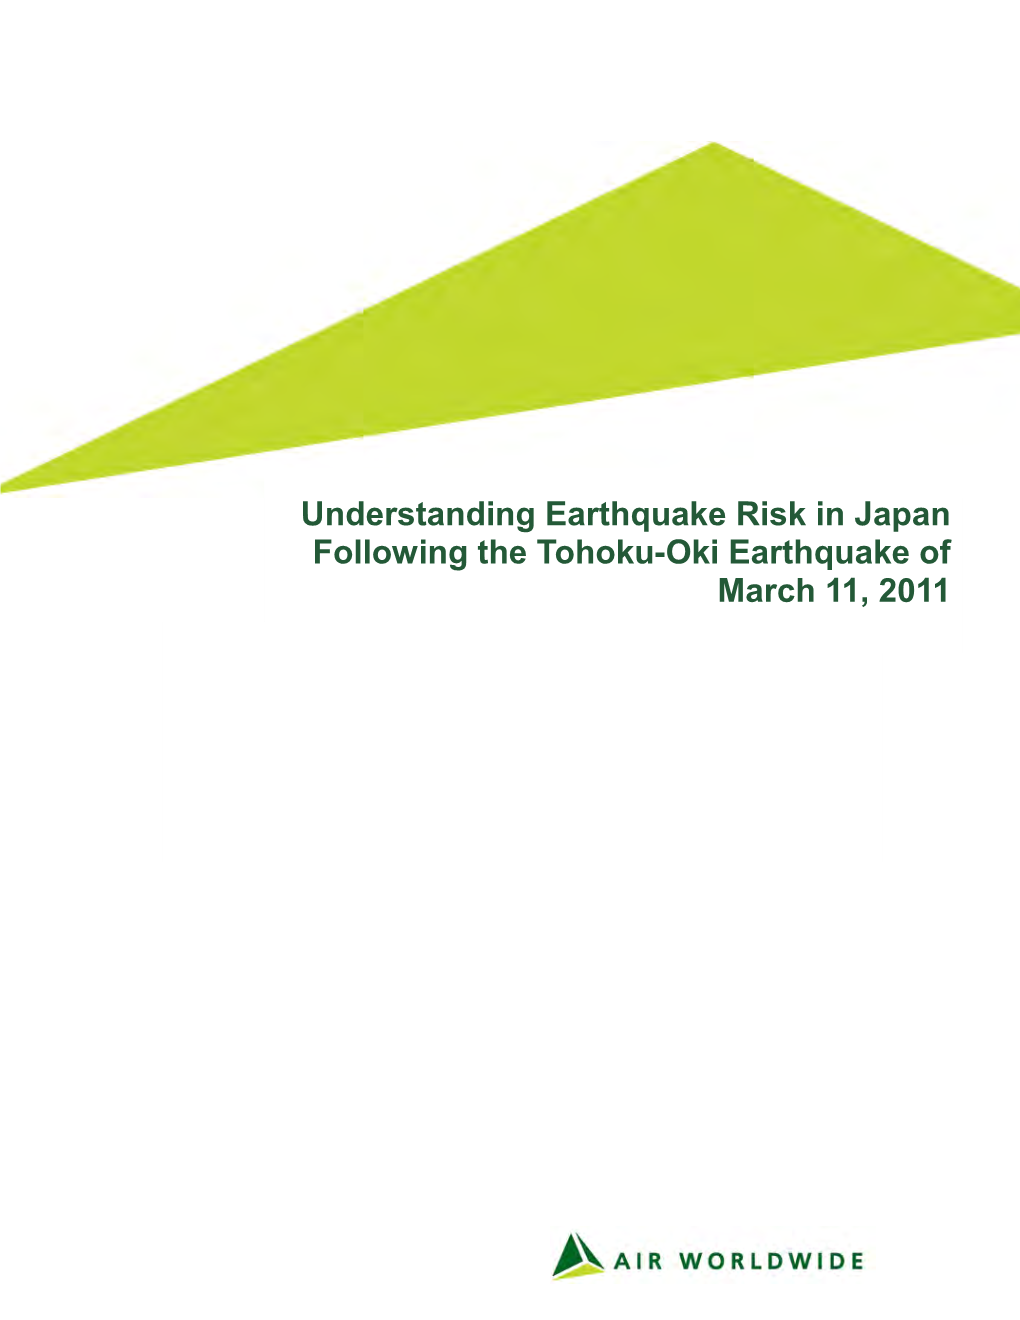 The Effects of the Tohoku Earthquake on Regional Seismicity in Japan